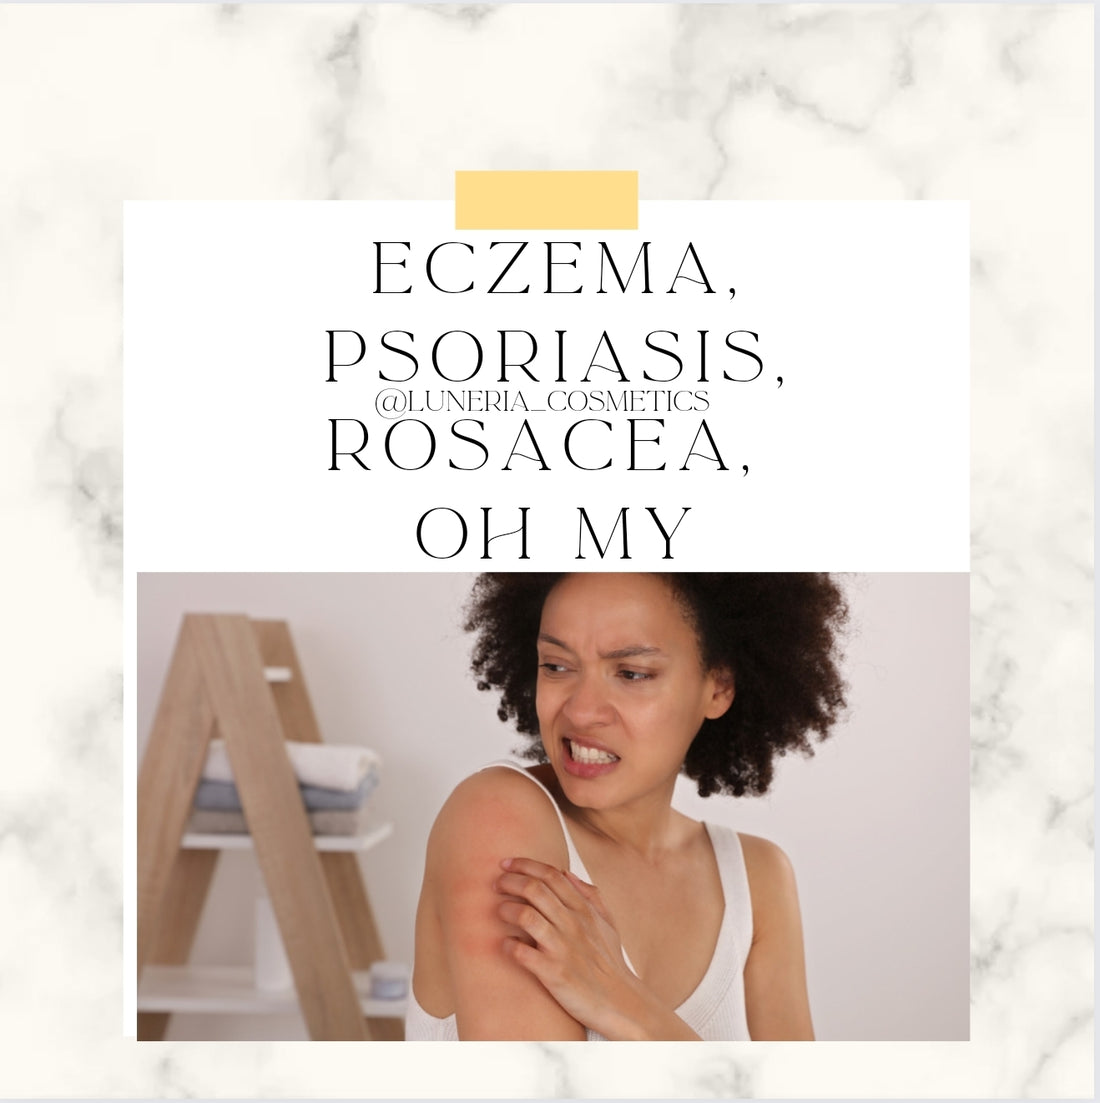 Eczema vs Psoriasis vs Rosacea: What are the similarities and differences?